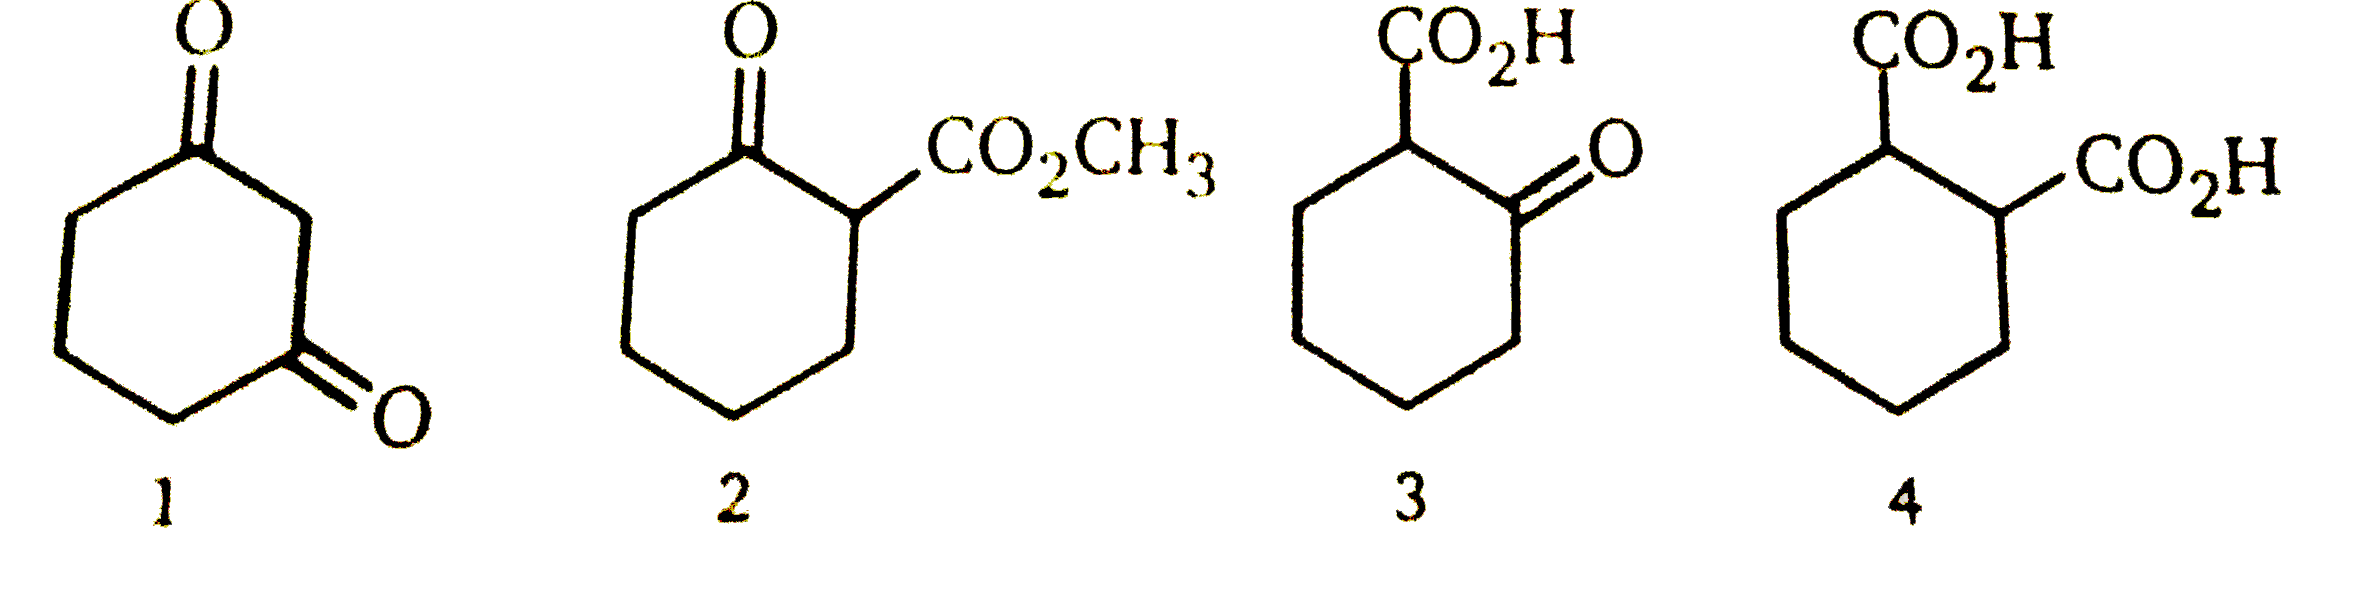 Which of the following compounds will undergo decarboxlation on heating?